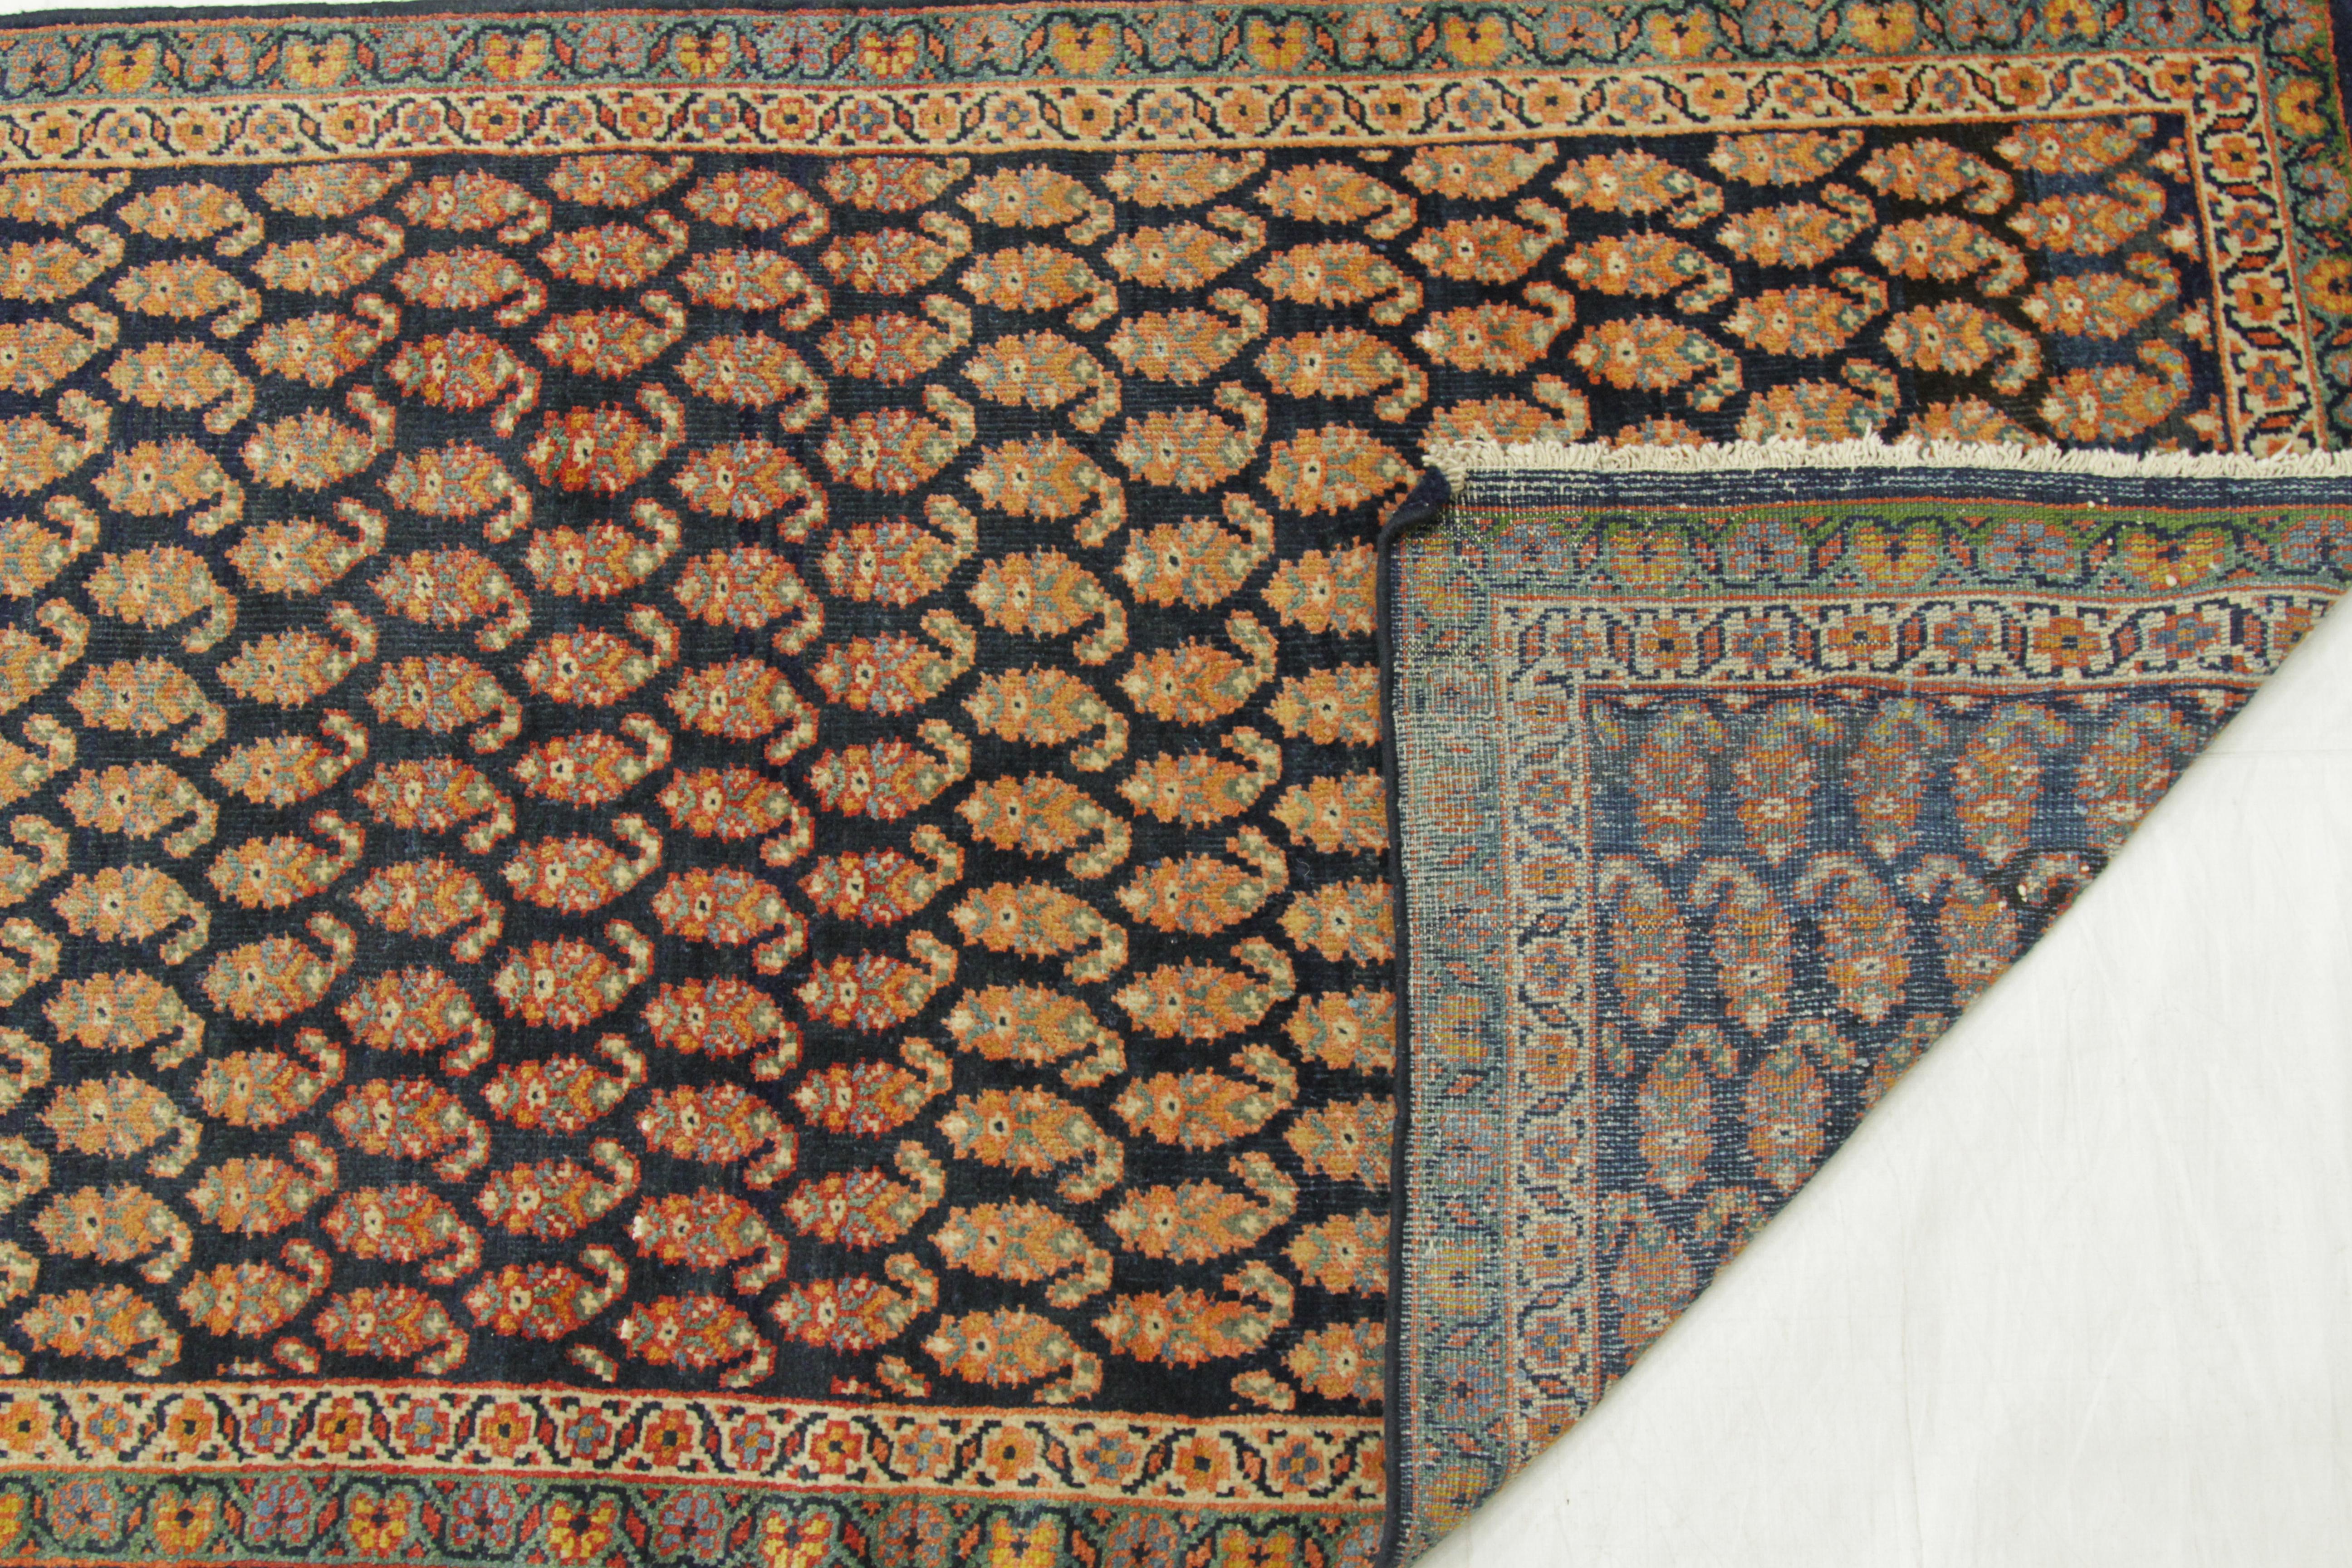 1930s Antique Persian Rug Mahal Design with Teeming ‘Boteh’ Patterns In Excellent Condition For Sale In Dallas, TX